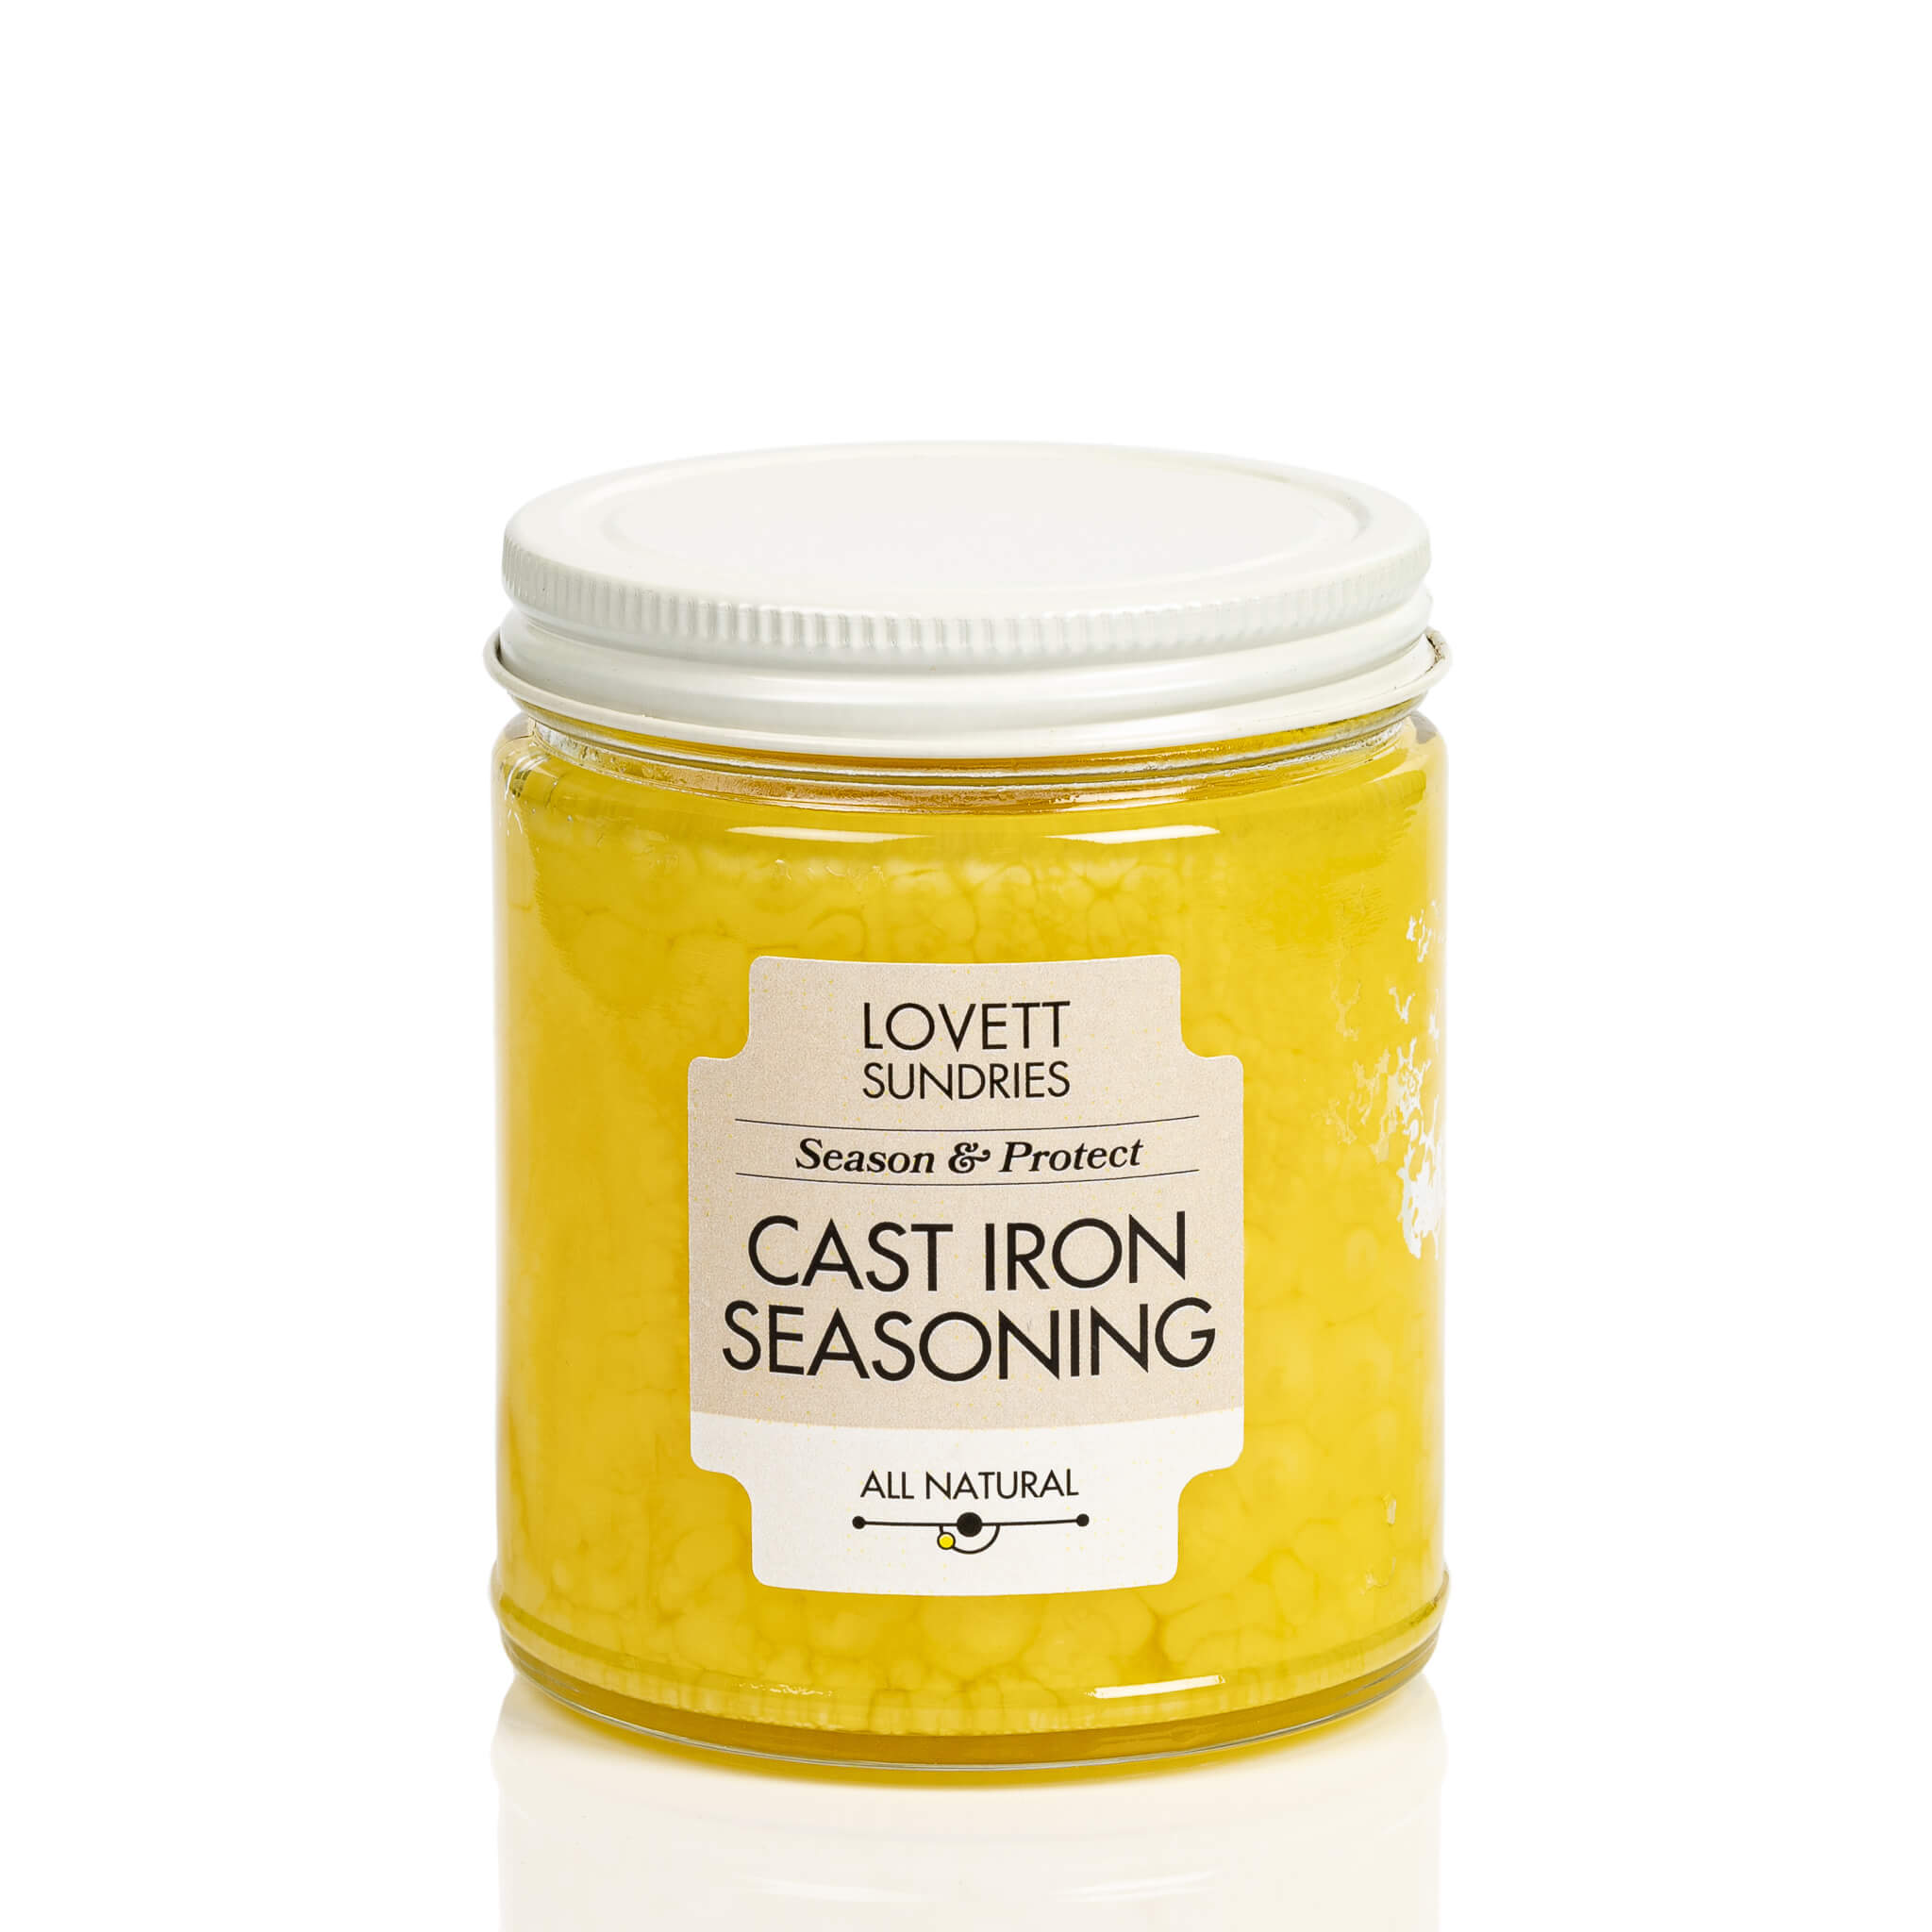 All natural cast iron seasoning oils for seasoning and protecting cast iron cookware in a glass jar.